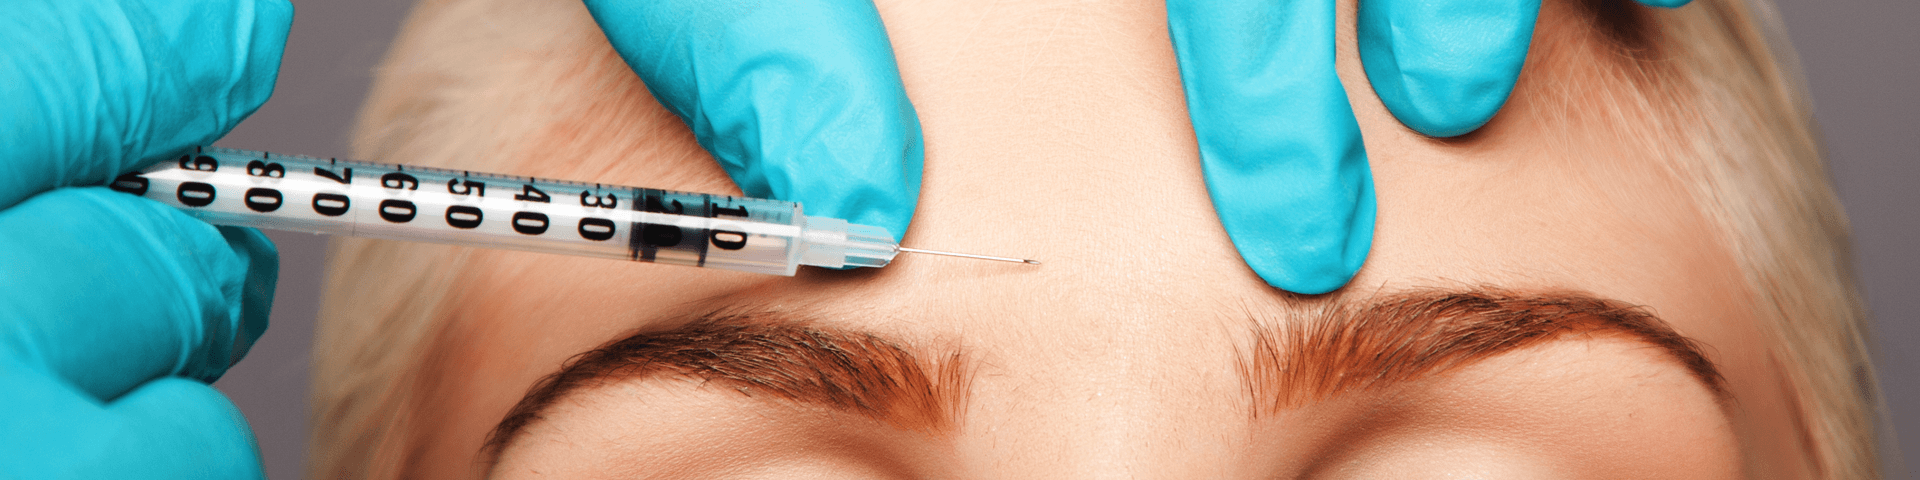 A woman is getting a botox injection in her forehead.